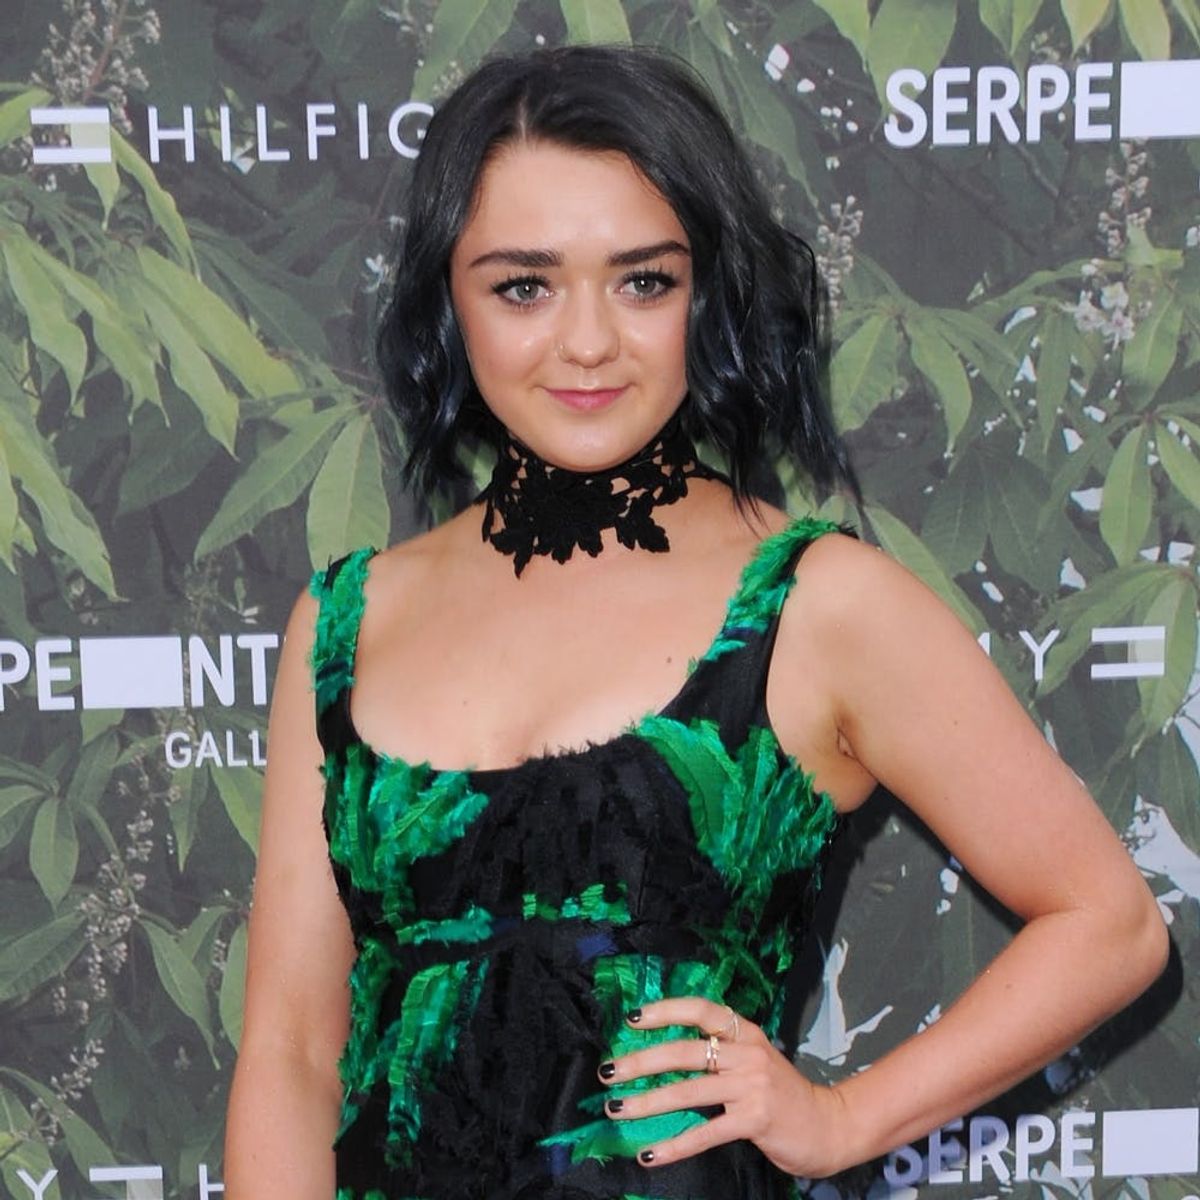 Here’s What Maisie Williams Has to Say About Season 7 of Game of Thrones